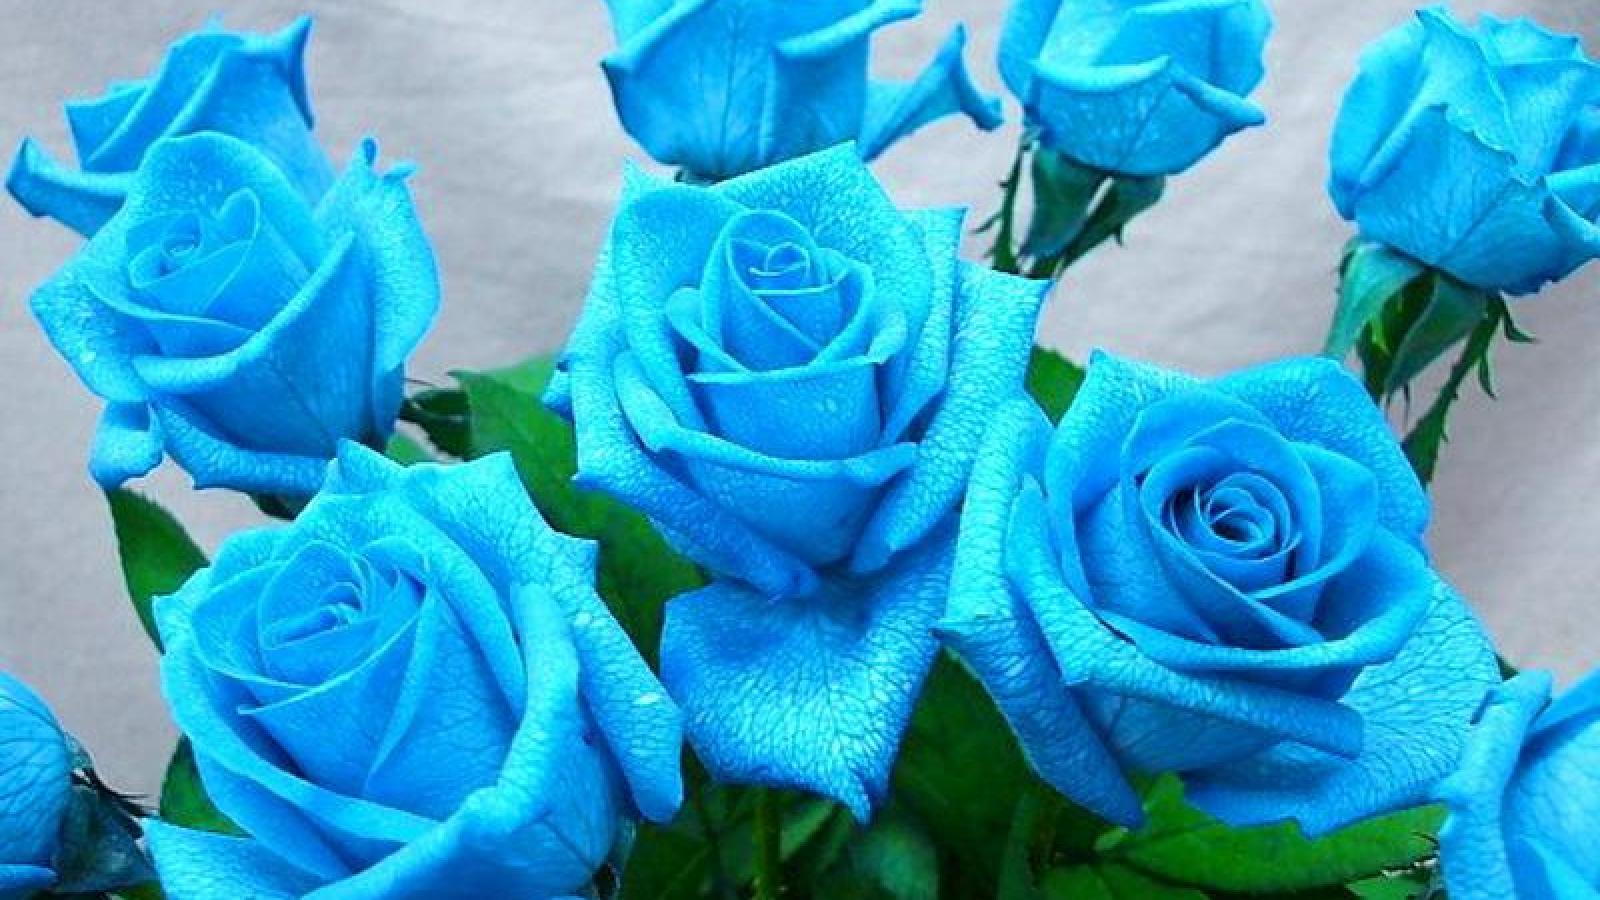 Wallpaper Tags: delicate lovely roses harmony nice beautiful flowers bouquet blue pretty